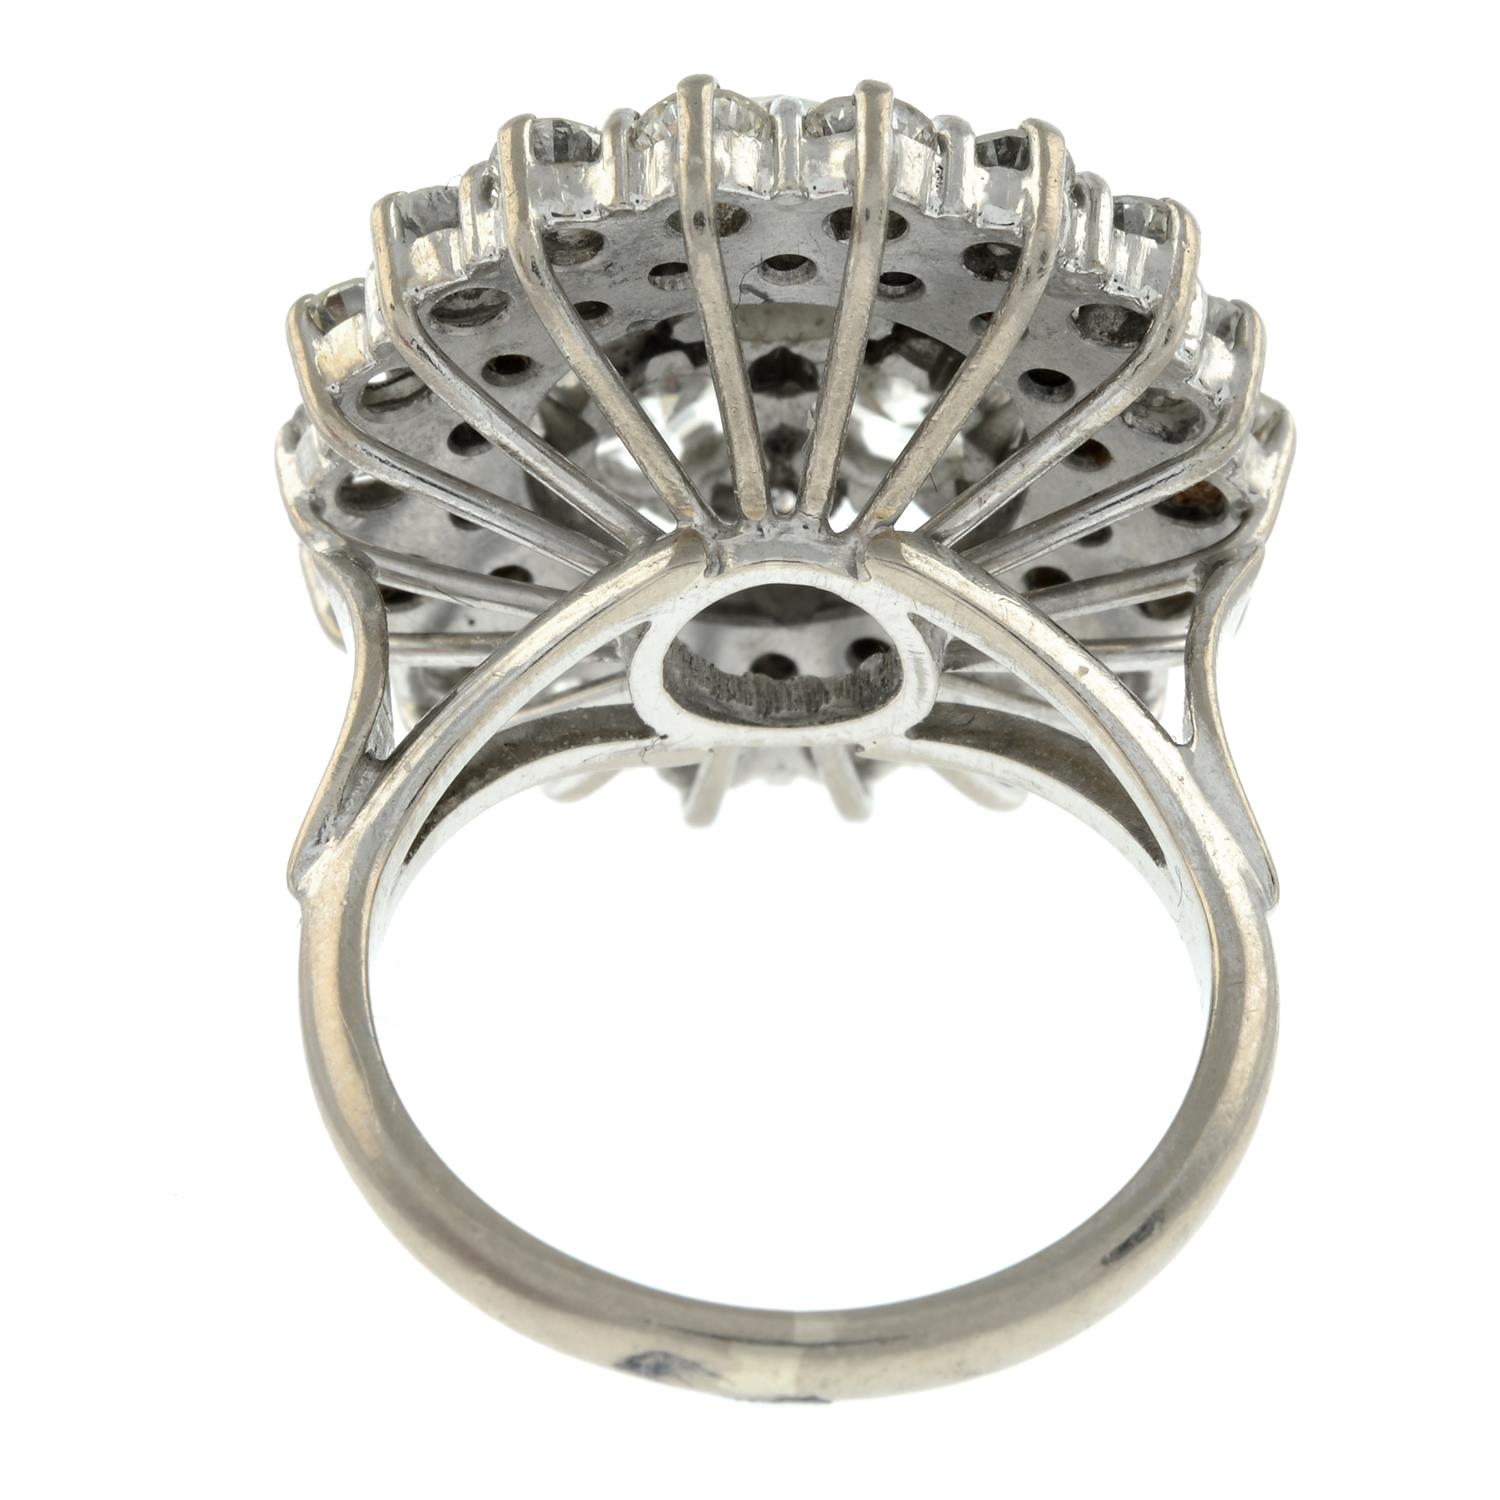 Diamond cluster ring - Image 2 of 5